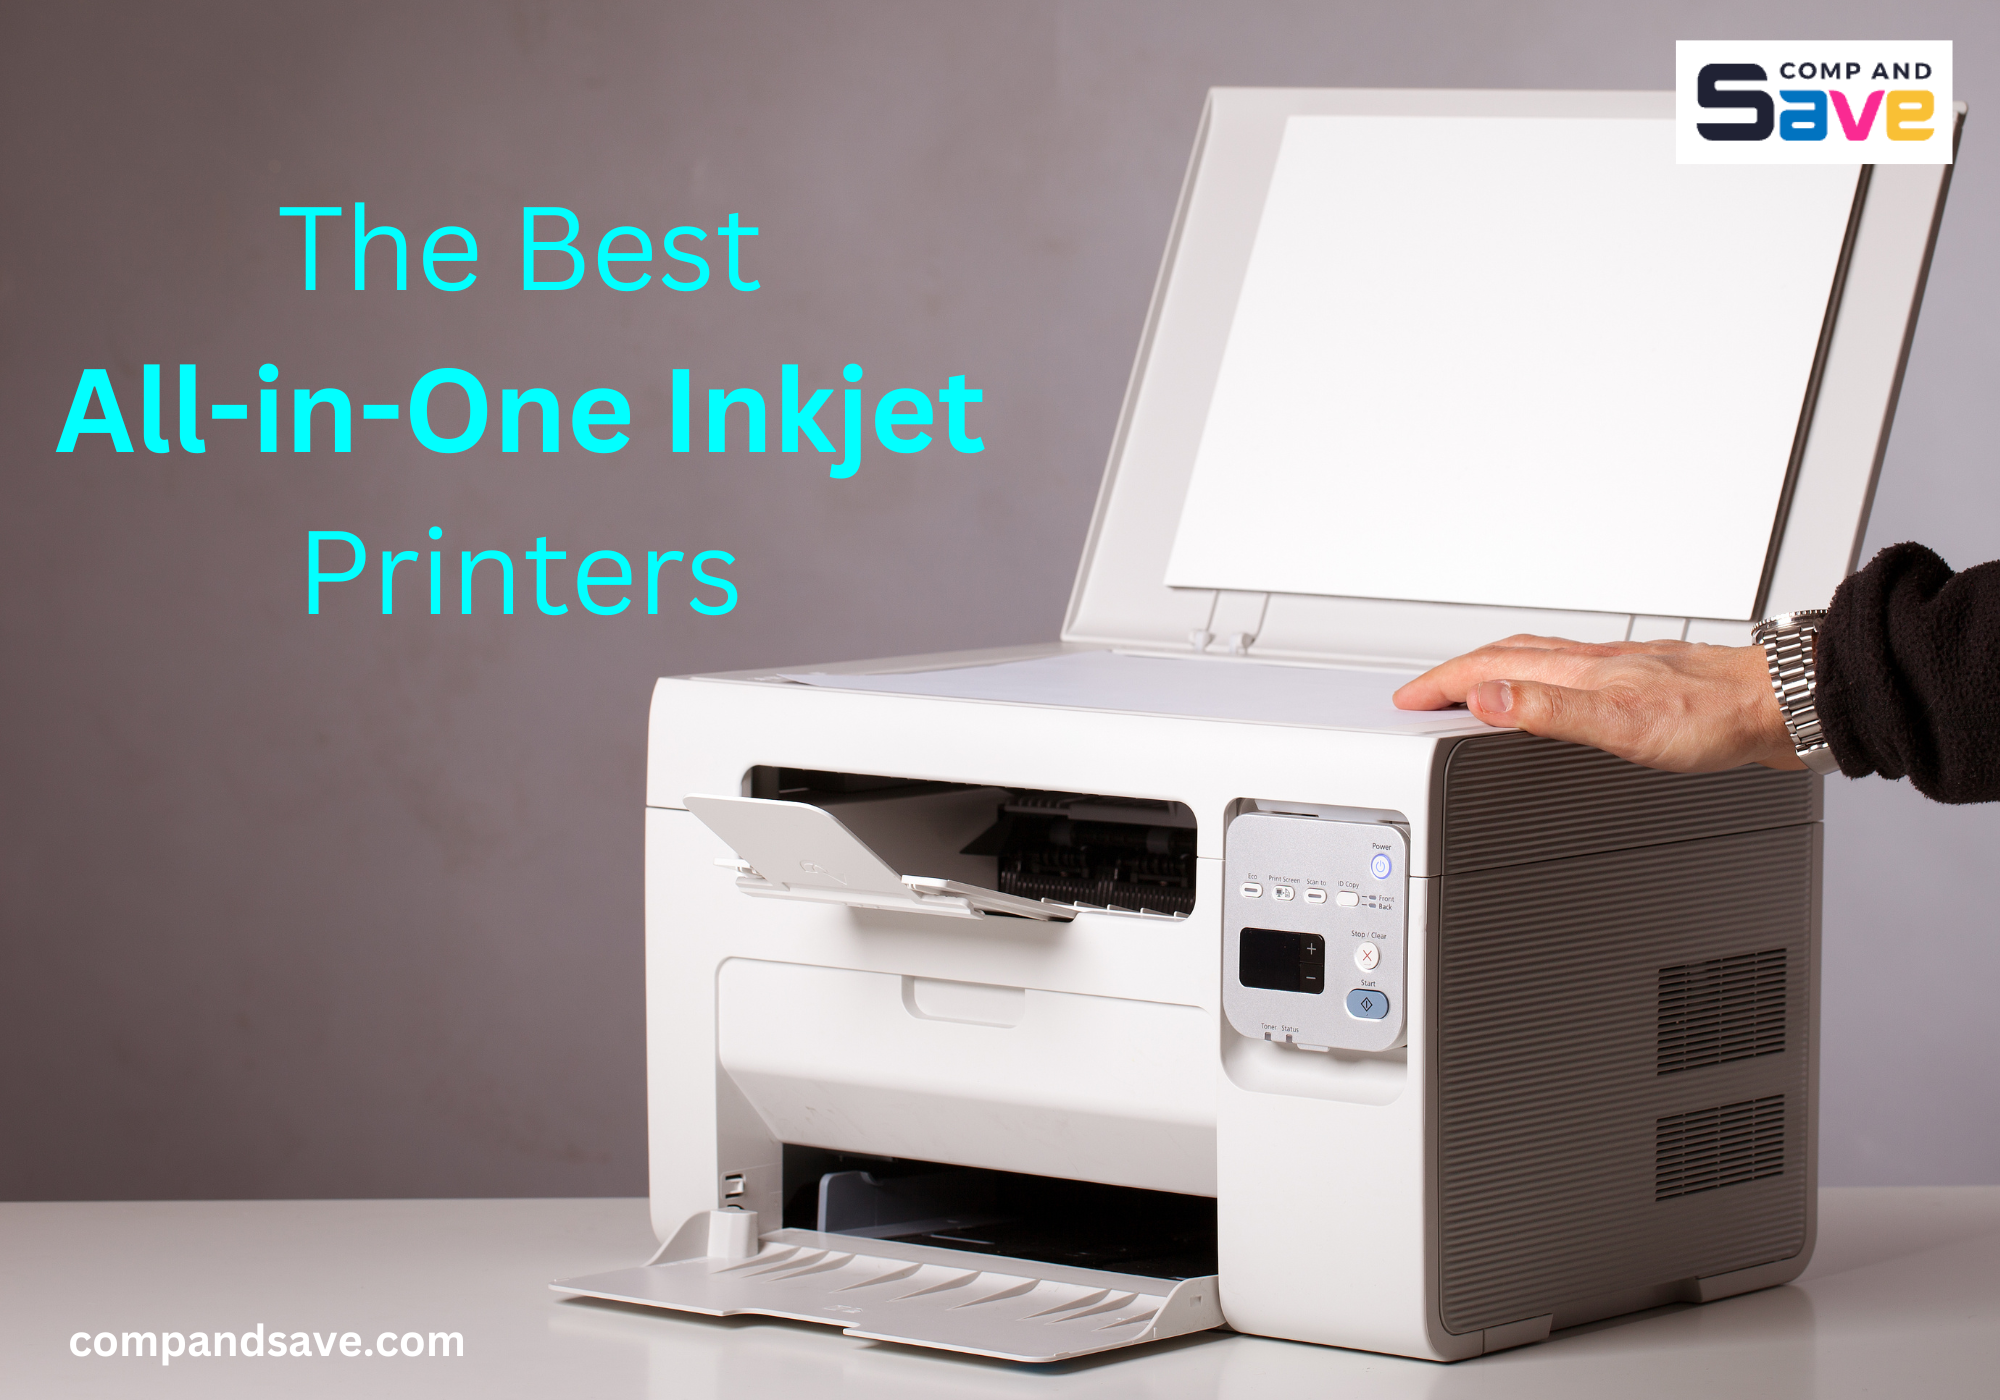 image from The Best All-in-One Inkjet Printers for Efficient Printing: Top 6 Picks